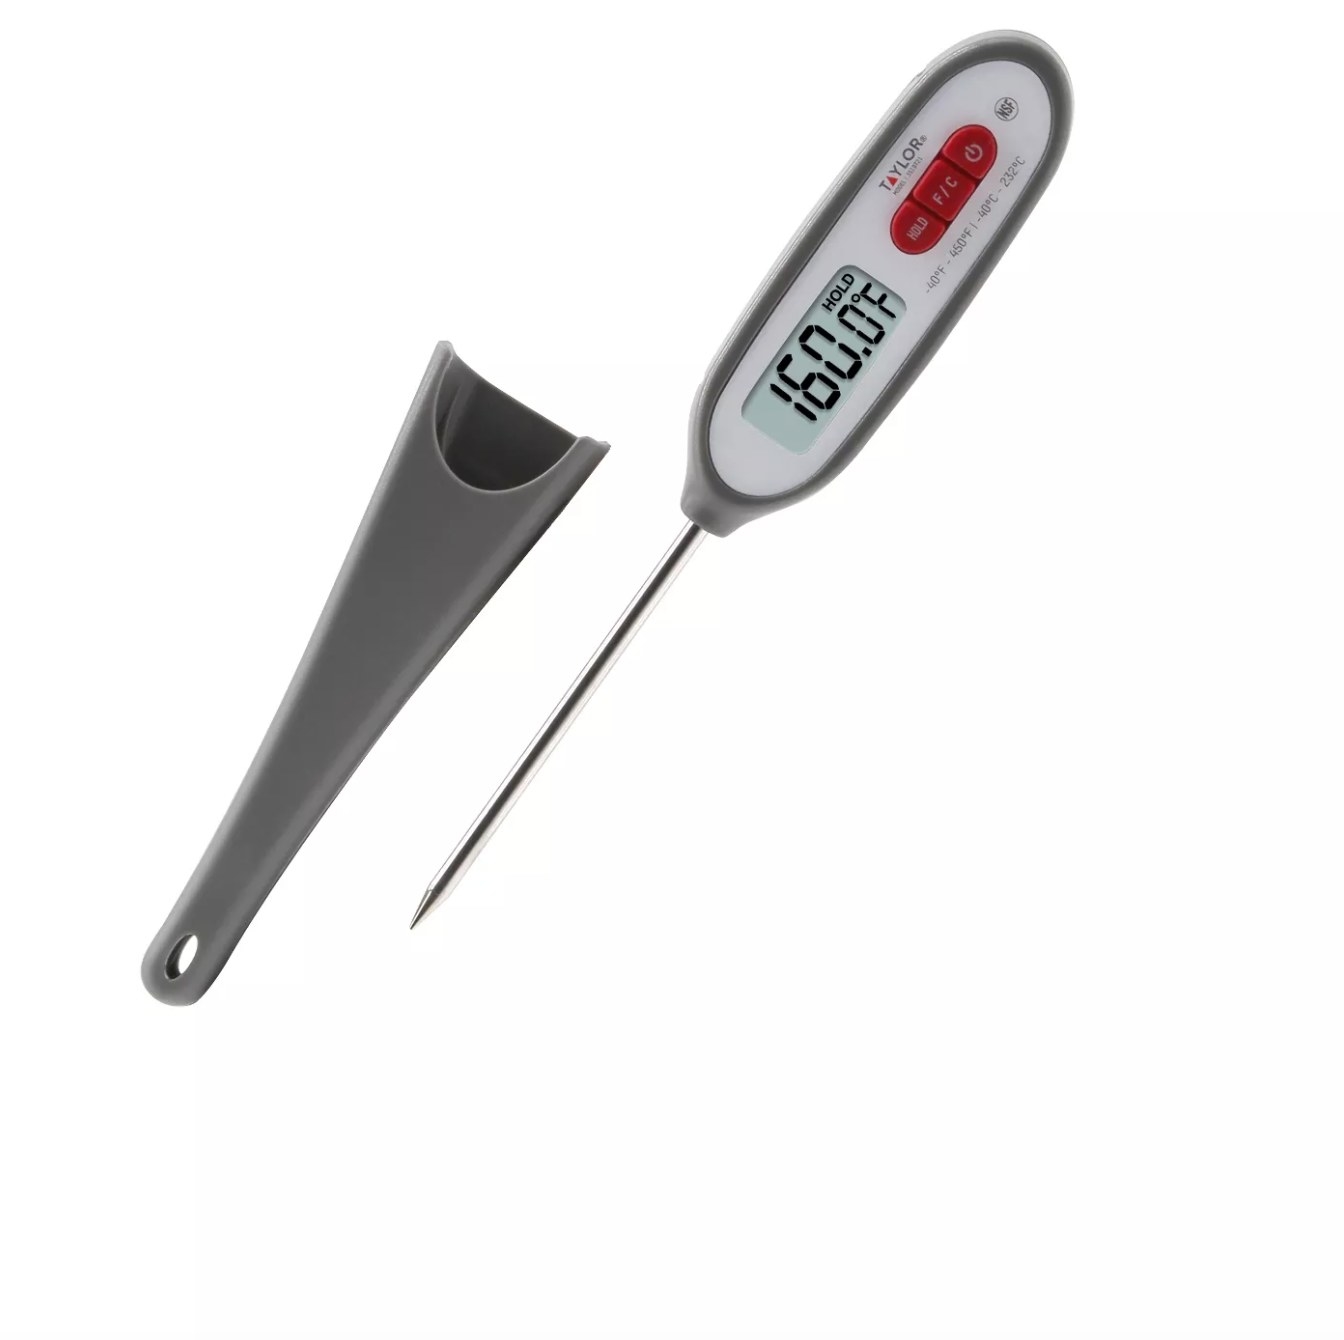 The digital kitchen thermometer in gray with its protective cover